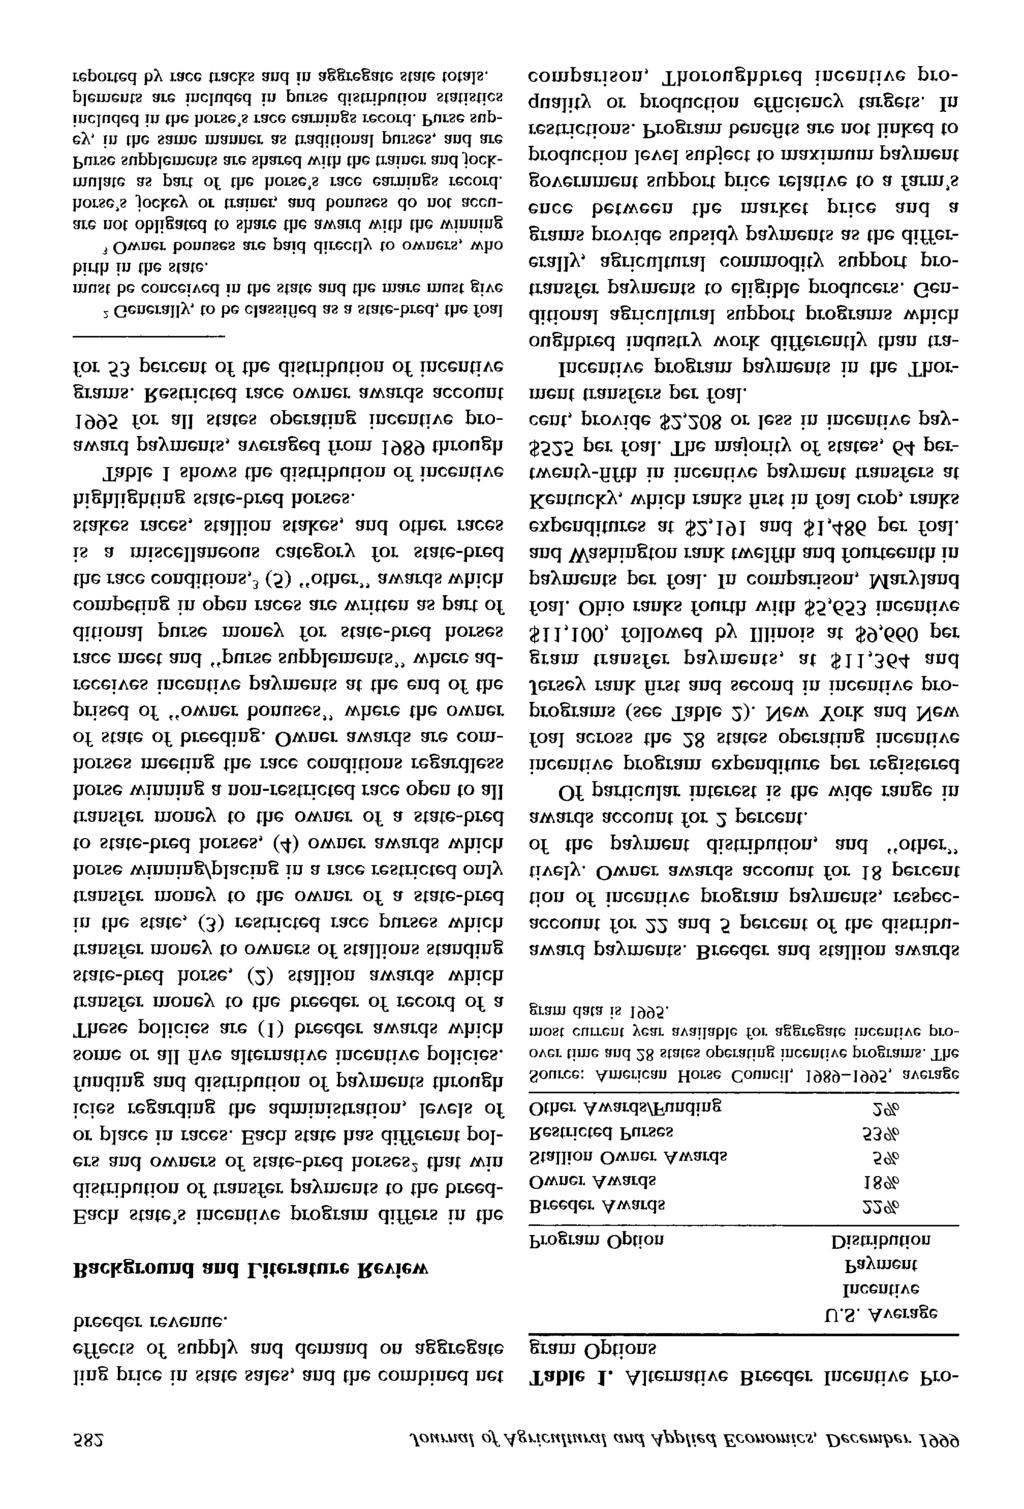 582 Journal of Agricultural and Applied Economics, December 1999 Iingprice instate sales, andthe combined net effects of supply and demand on aggregate breeder revenue.